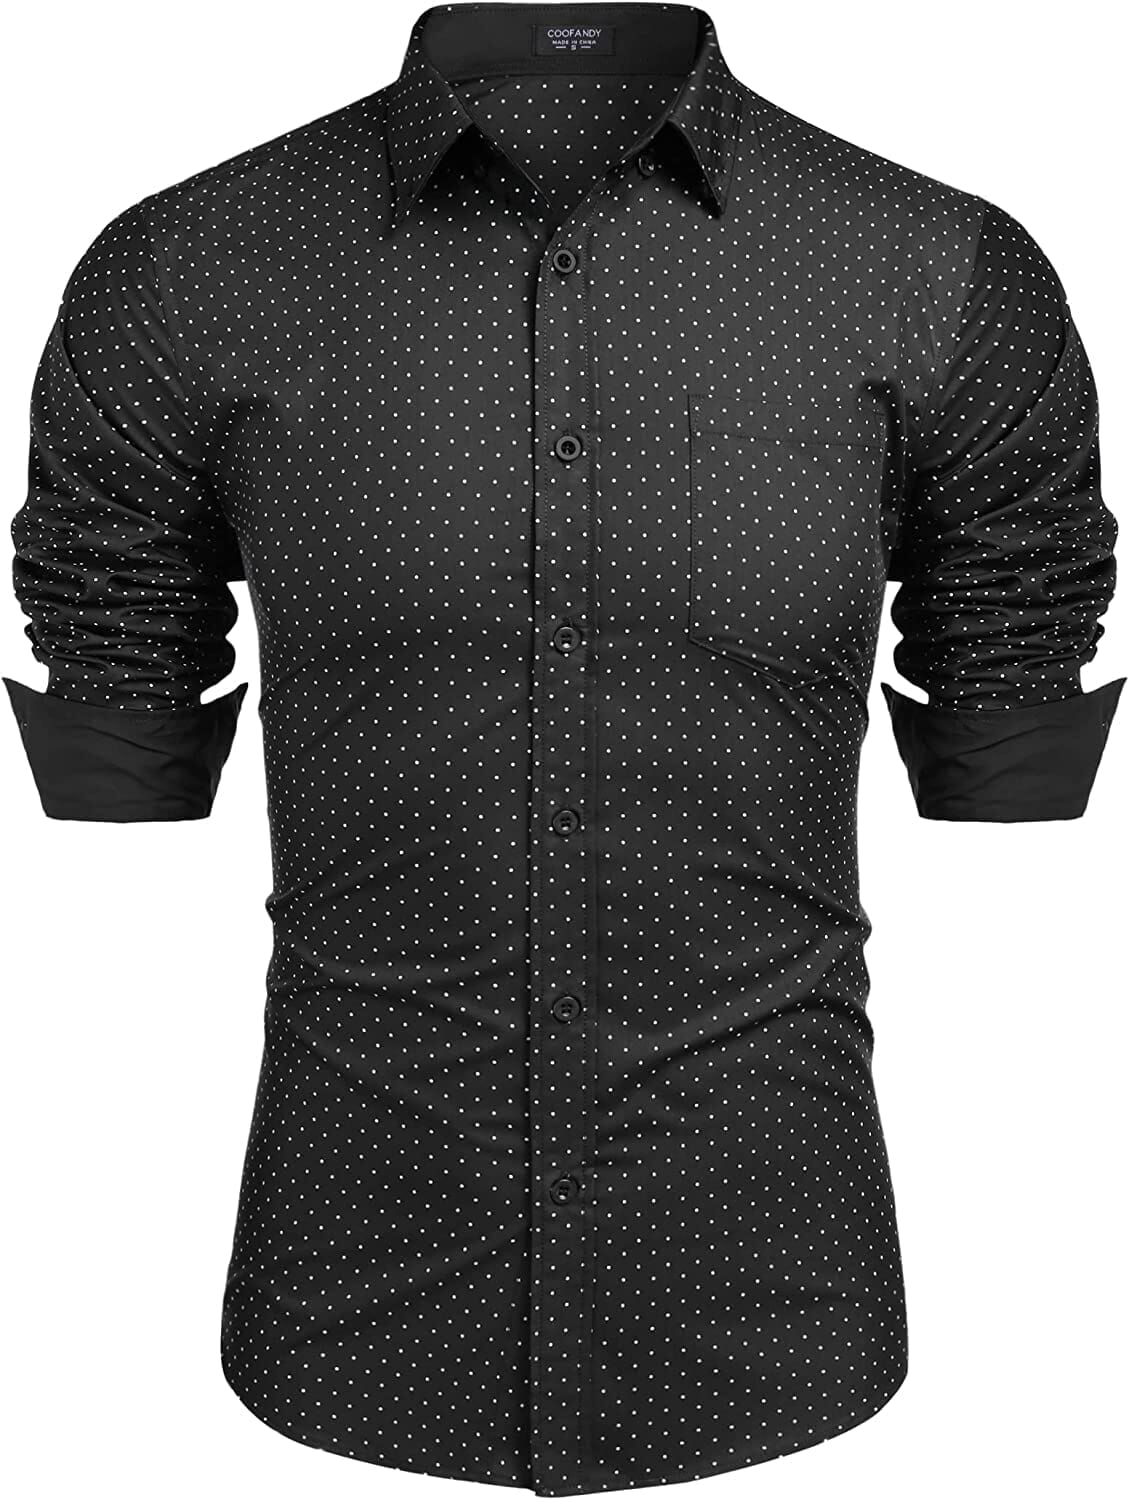 Coofandy Men's Casual Long Sleeve Shirt (US Only) Shirts Coofandy's 01-black S 